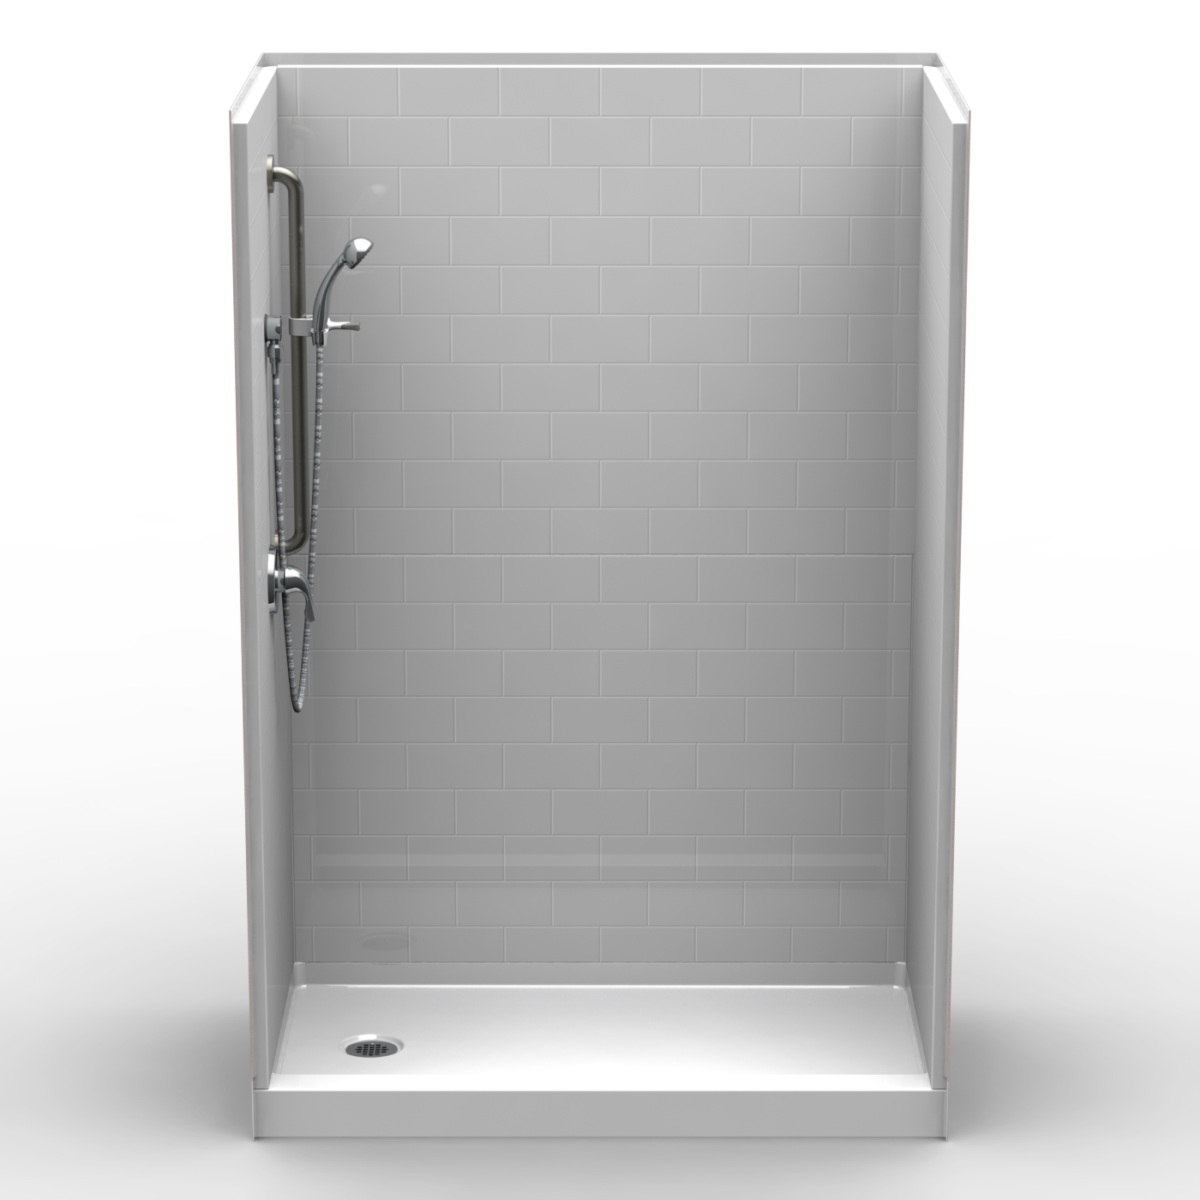 5LBS5430FB.V2 L/R, Five Piece 54” x 30” Curbed Shower, 4” Threshold, End Drain, “Subway Tile”